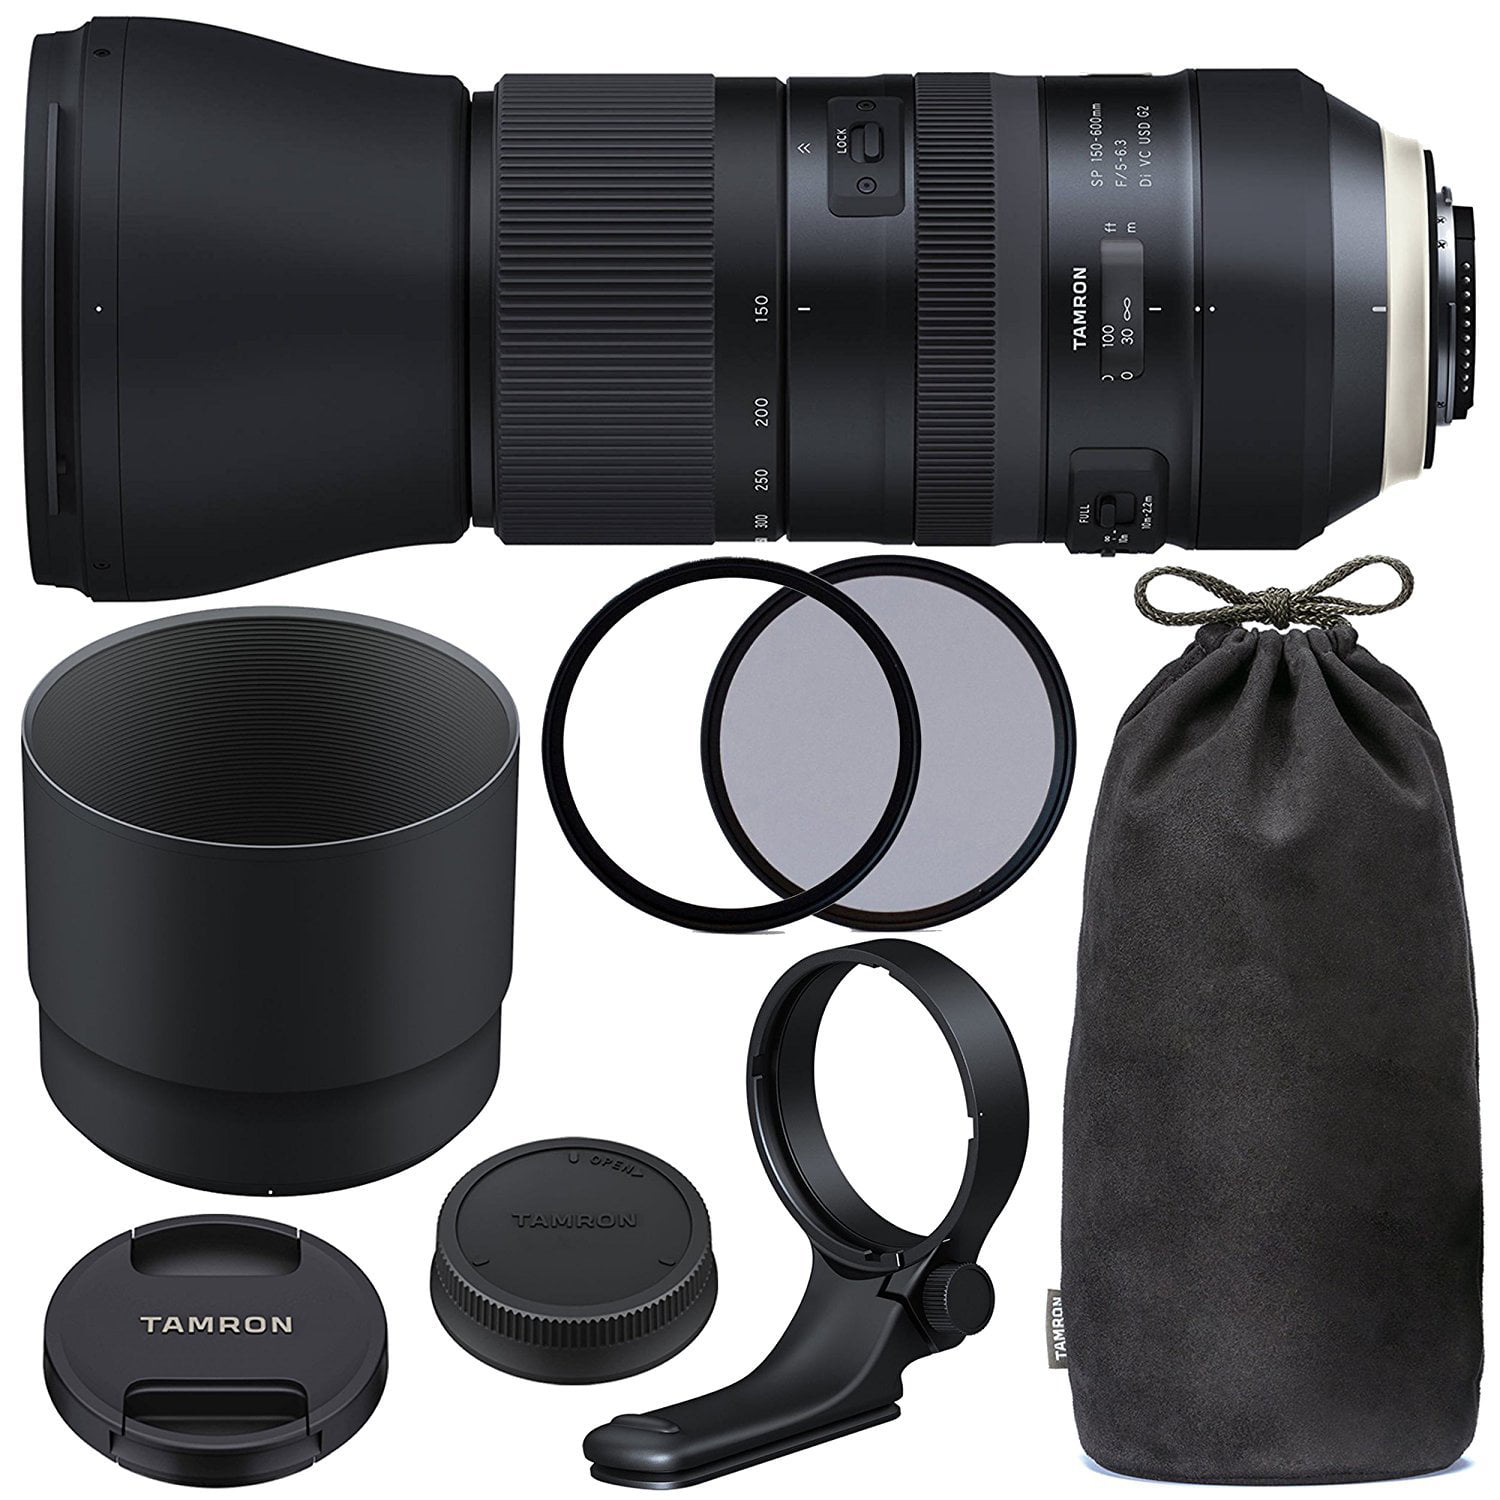 Filter Tripod Collar & More Tamron SP 150-600mm f/5-6.3 Di VC USD G2 for Canon EF with 95mm Ultraviolet Tamron Lens Hood International Version Filter C-PL Tamron Case UV 95mm Polarizing 